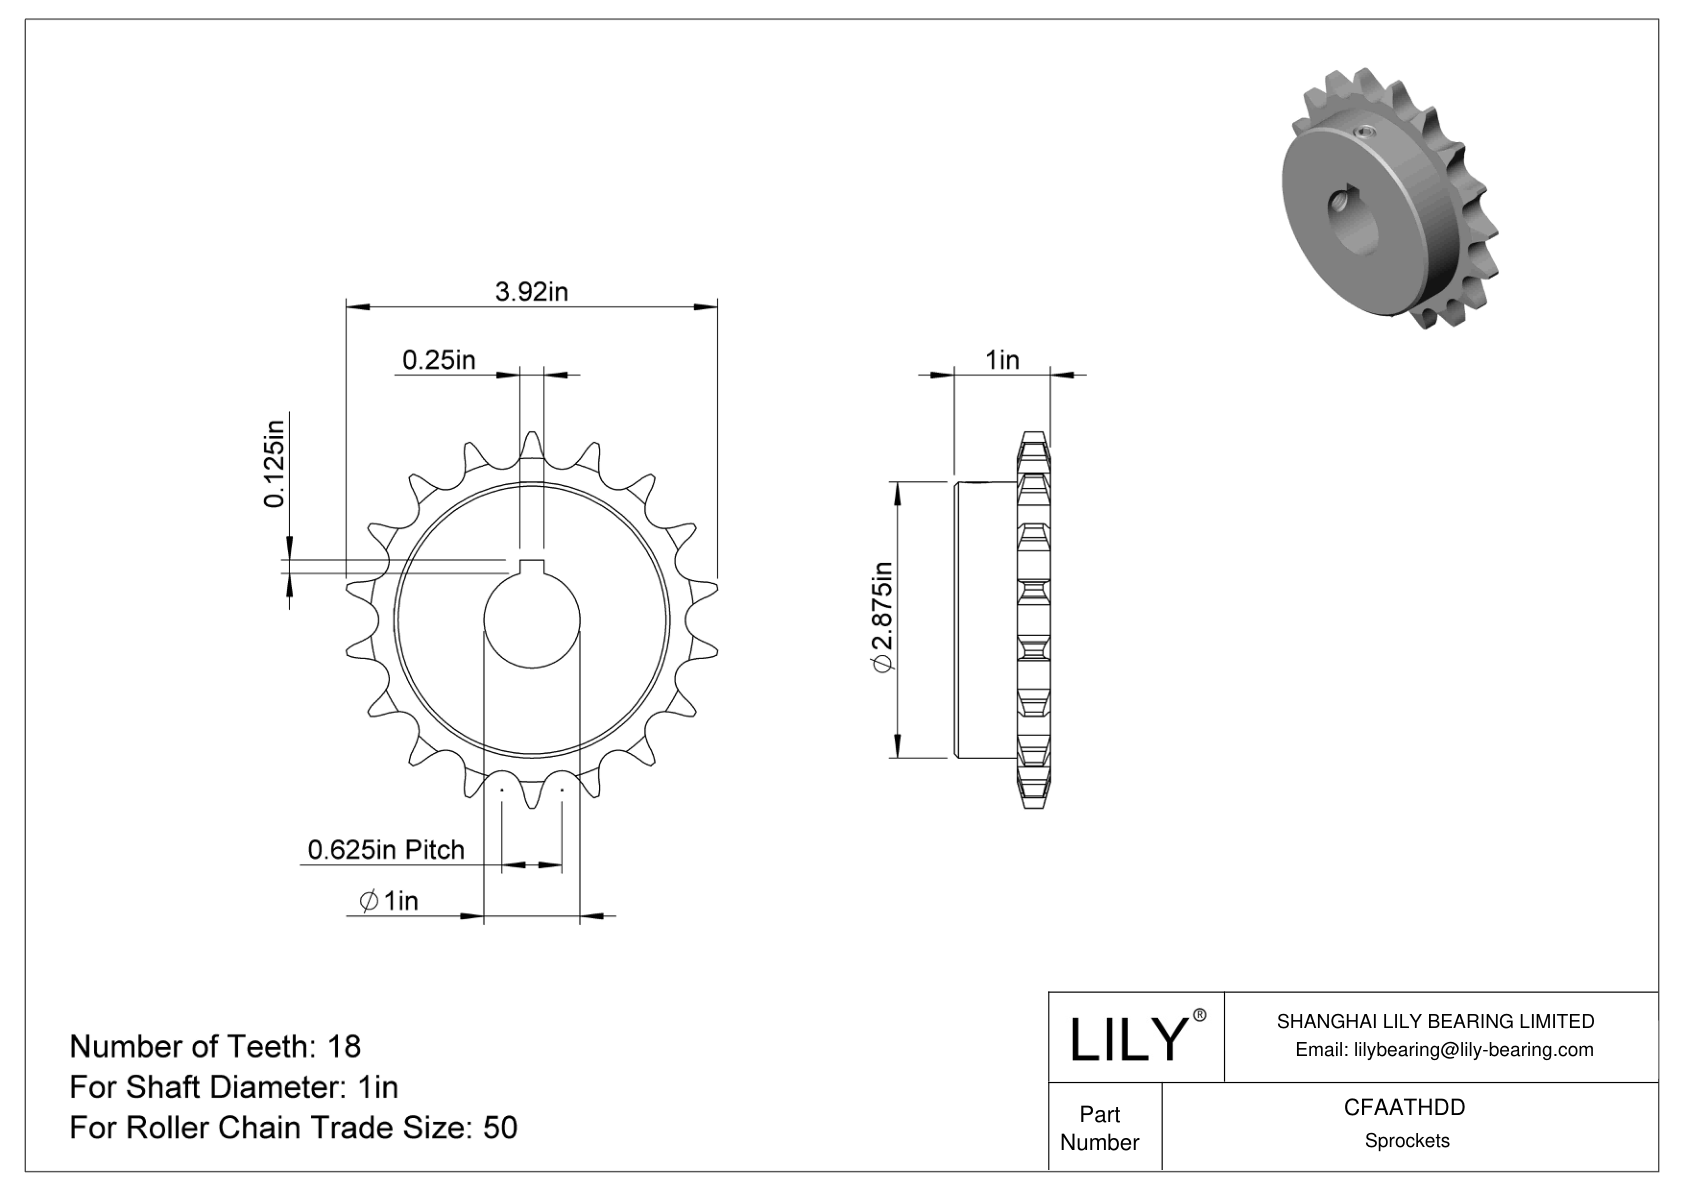 CFAATHDD Wear-Resistant Sprockets for ANSI Roller Chain cad drawing